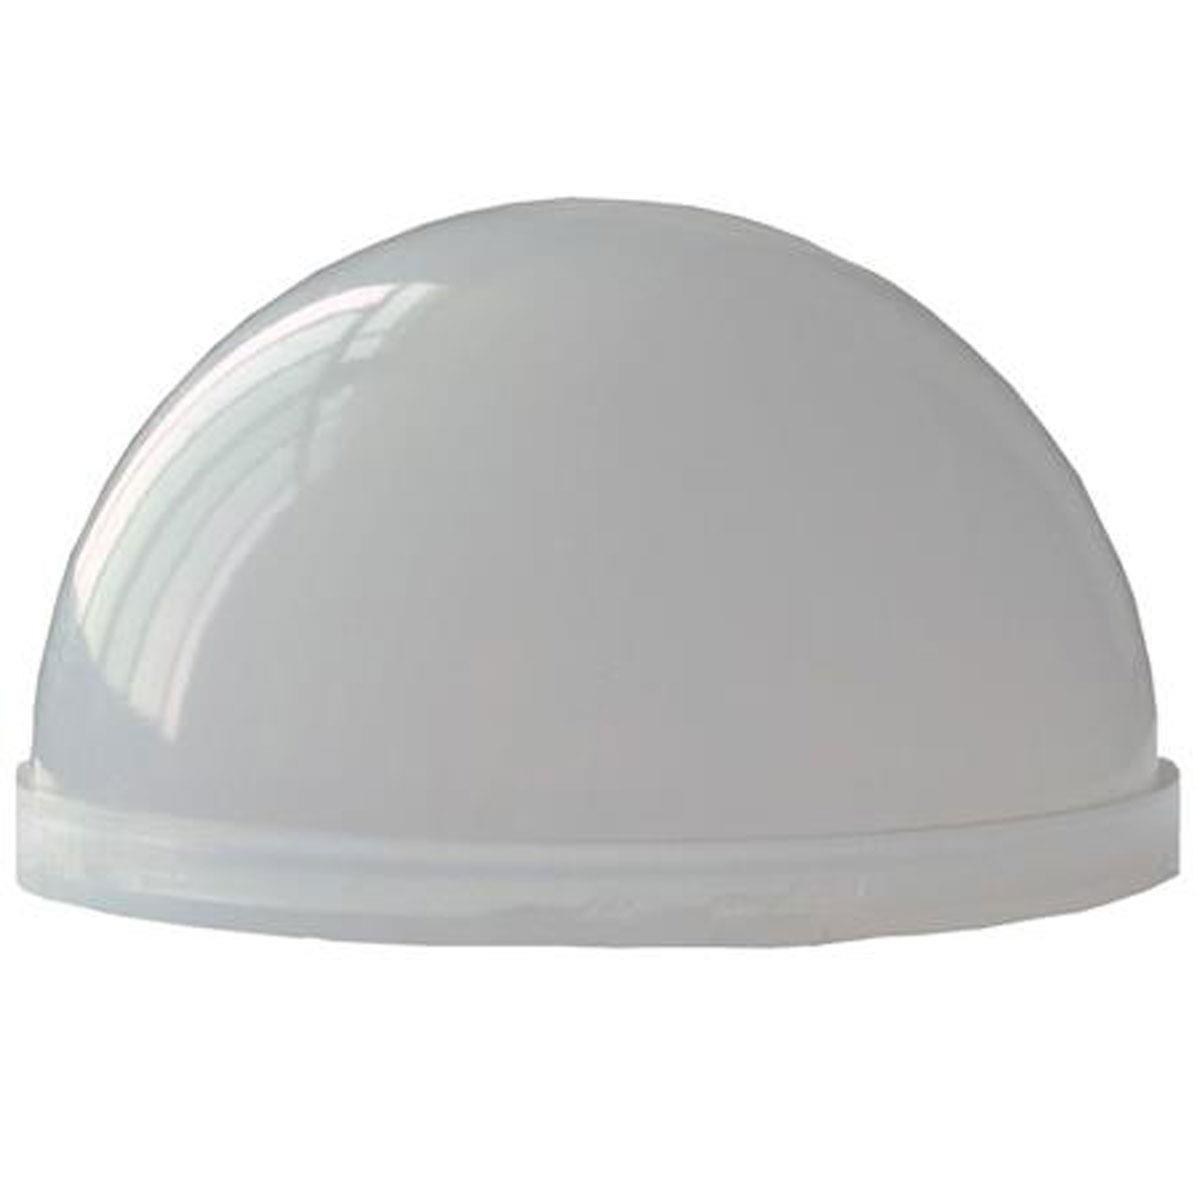 Image of Hive 90mm Snap-On Hard Plastic Dome Diffuser for Bumble Bee 25-C/50-C/Wasp 100-C